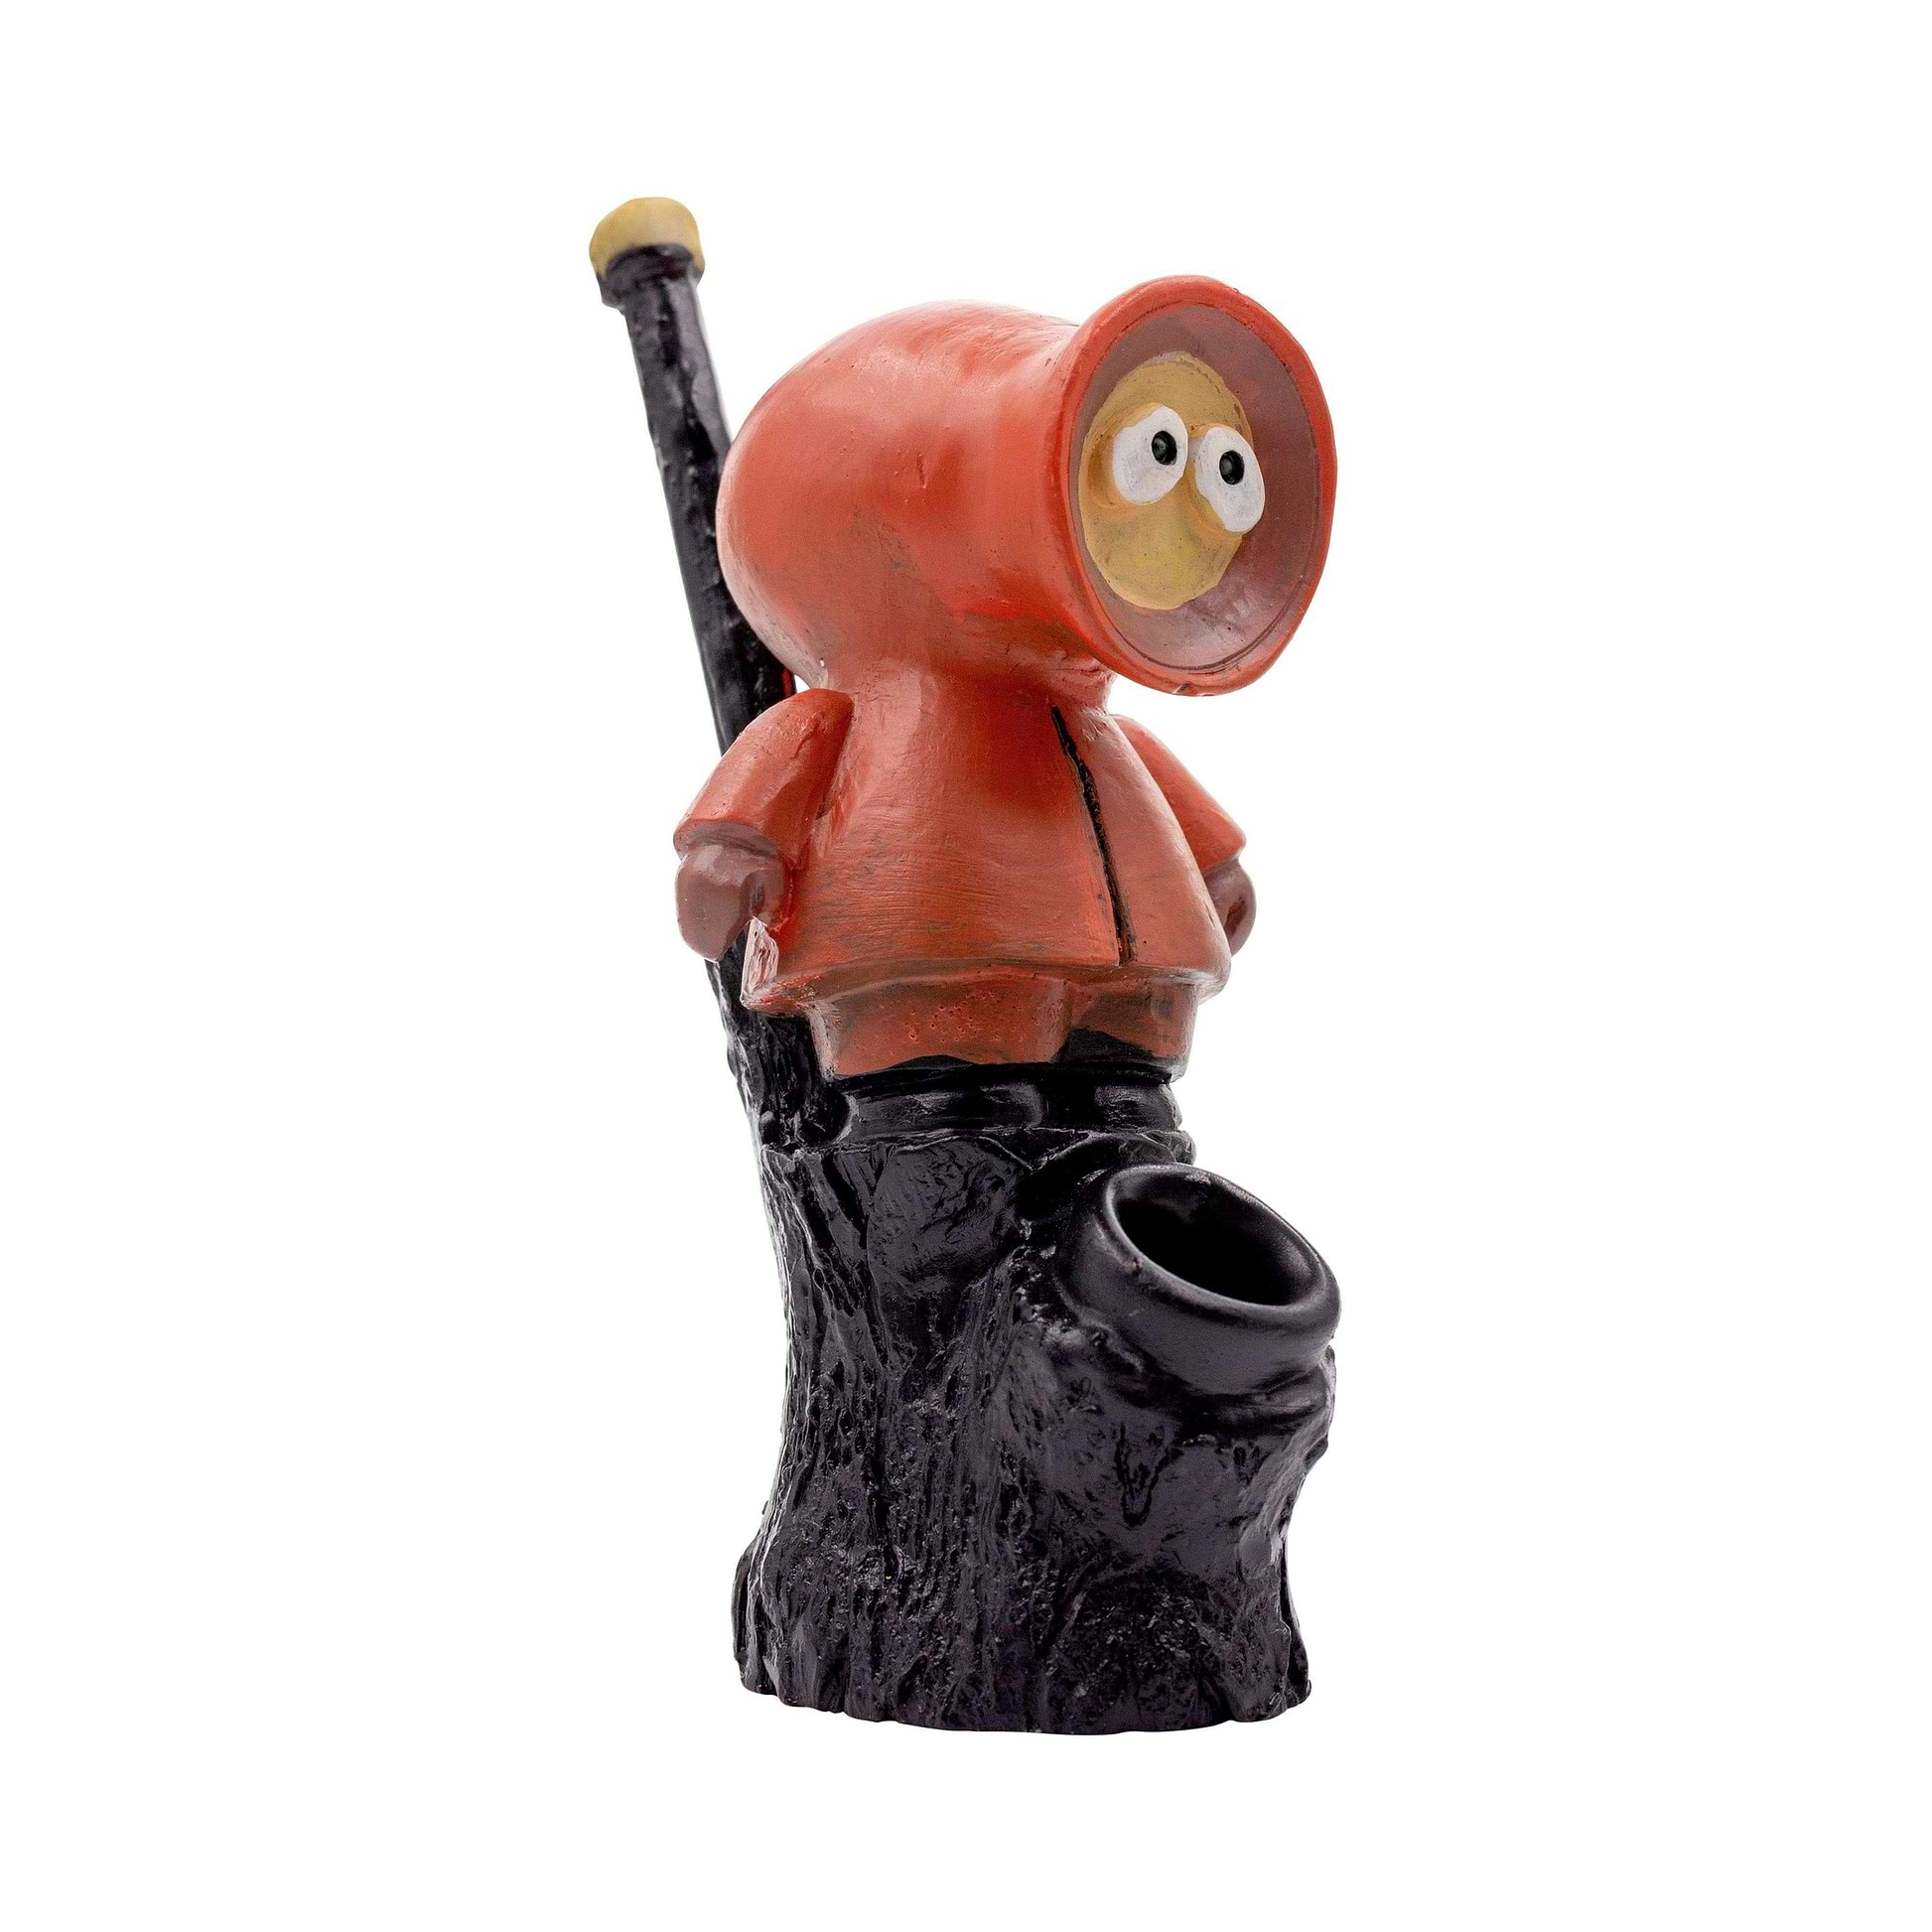 Cool hand-painted clay pipe smoking device figurine-like South park kenny design